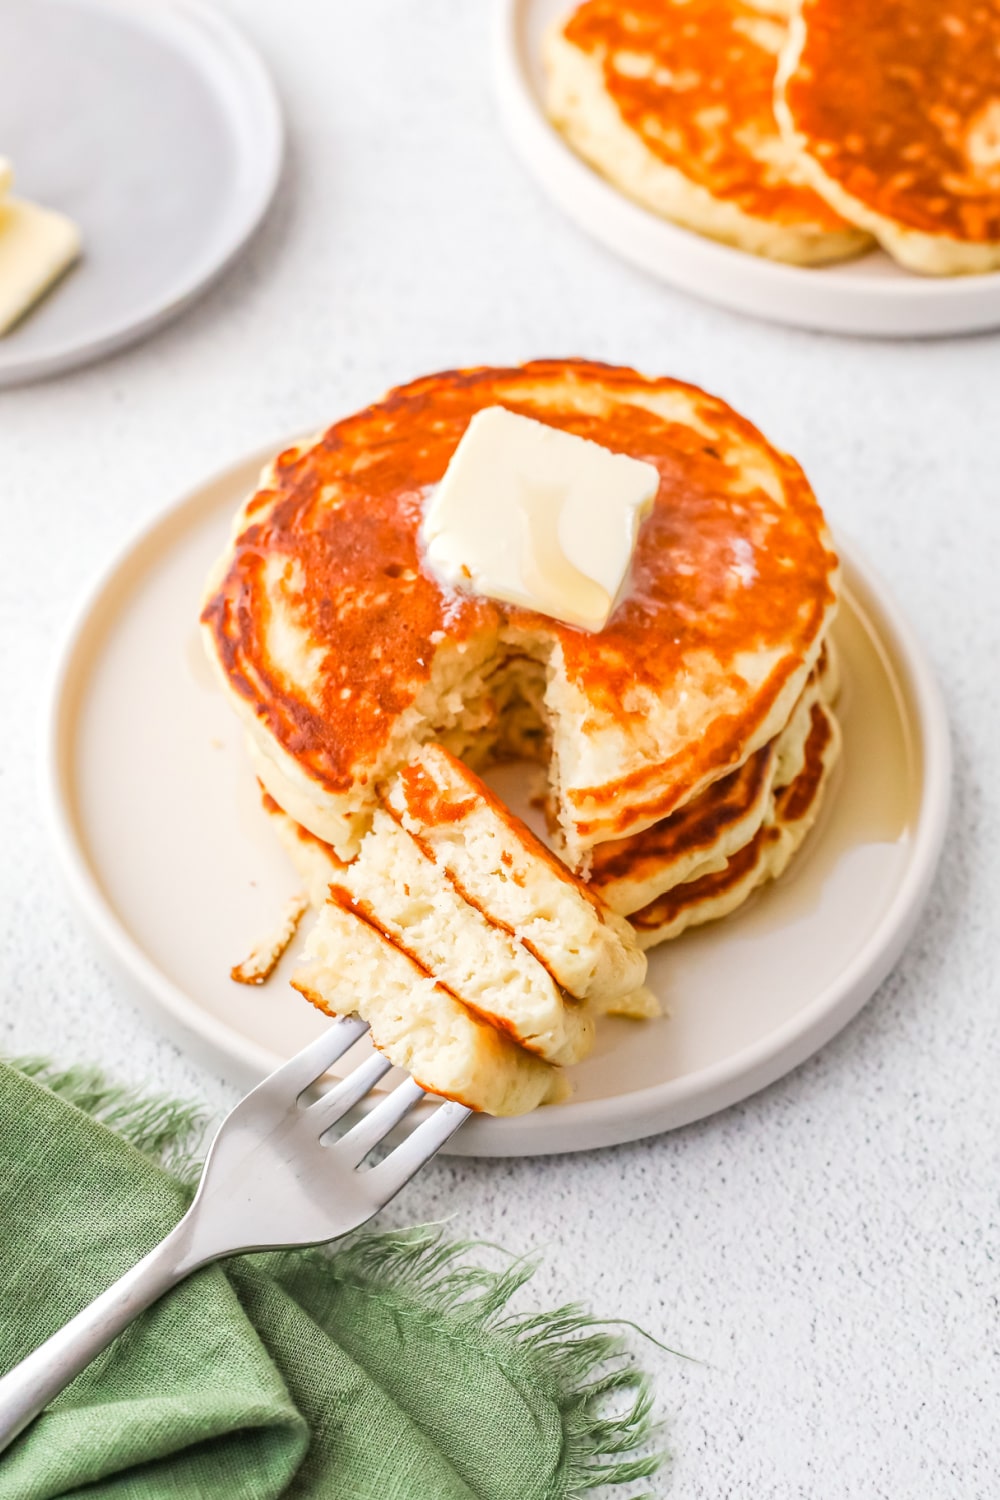 A stack of three pancakes topped with a pat of butter with a bite cut out on a fork.